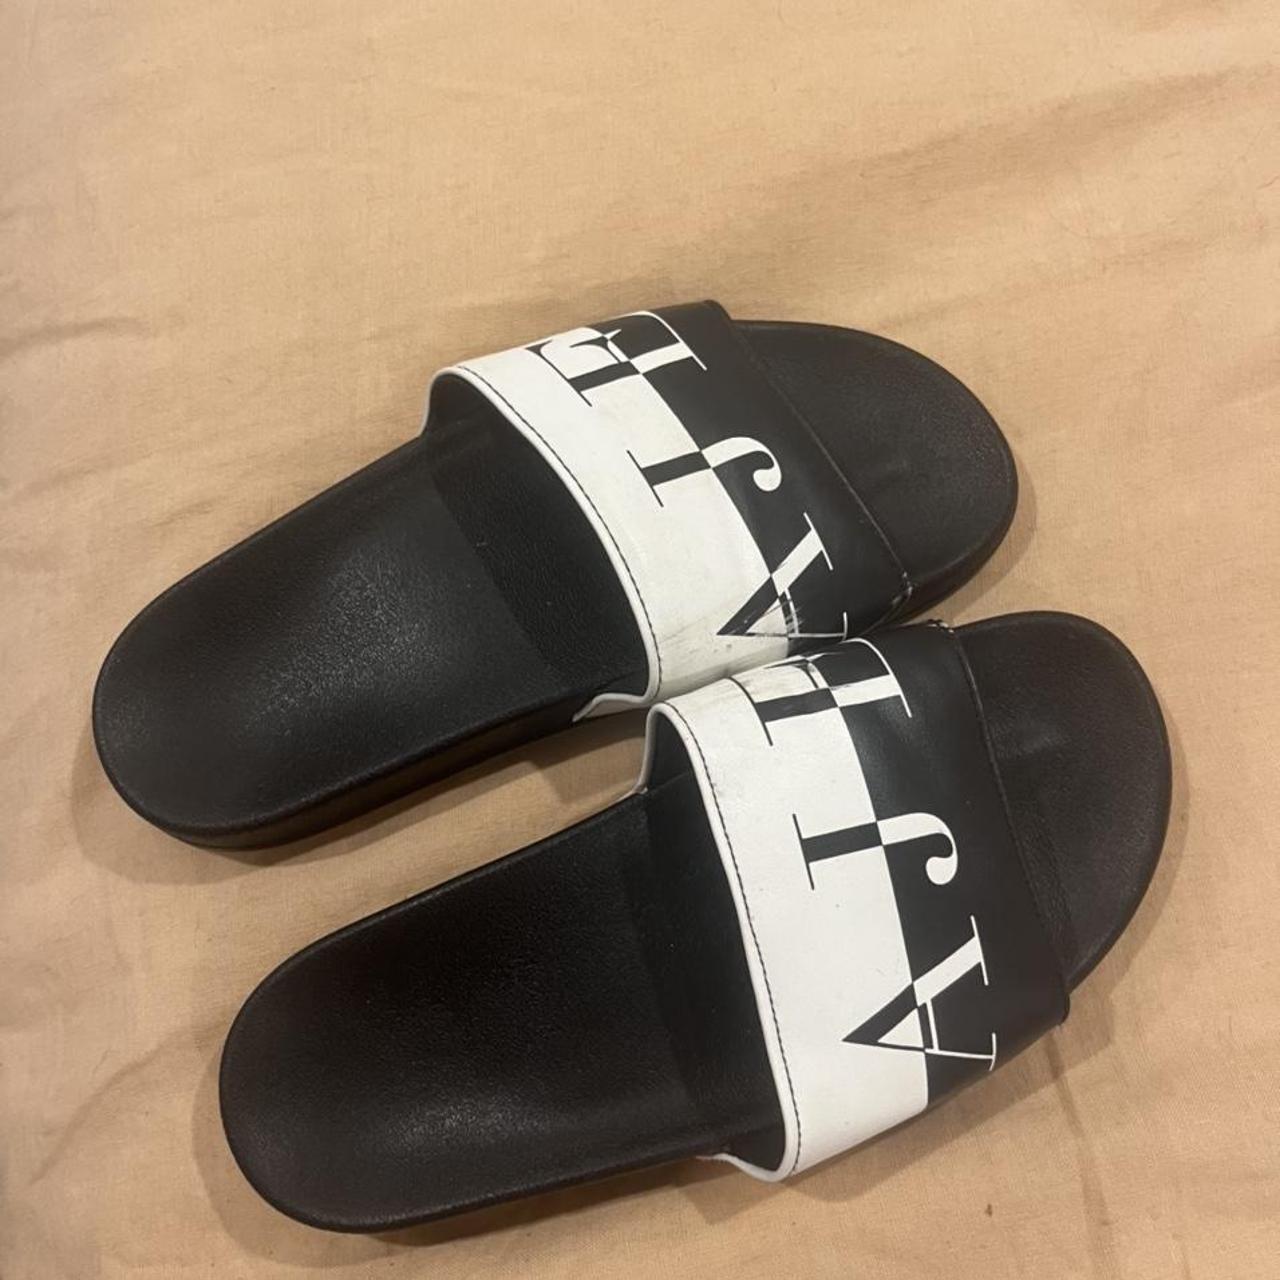 aje slides womens size 8 perf condition - Depop